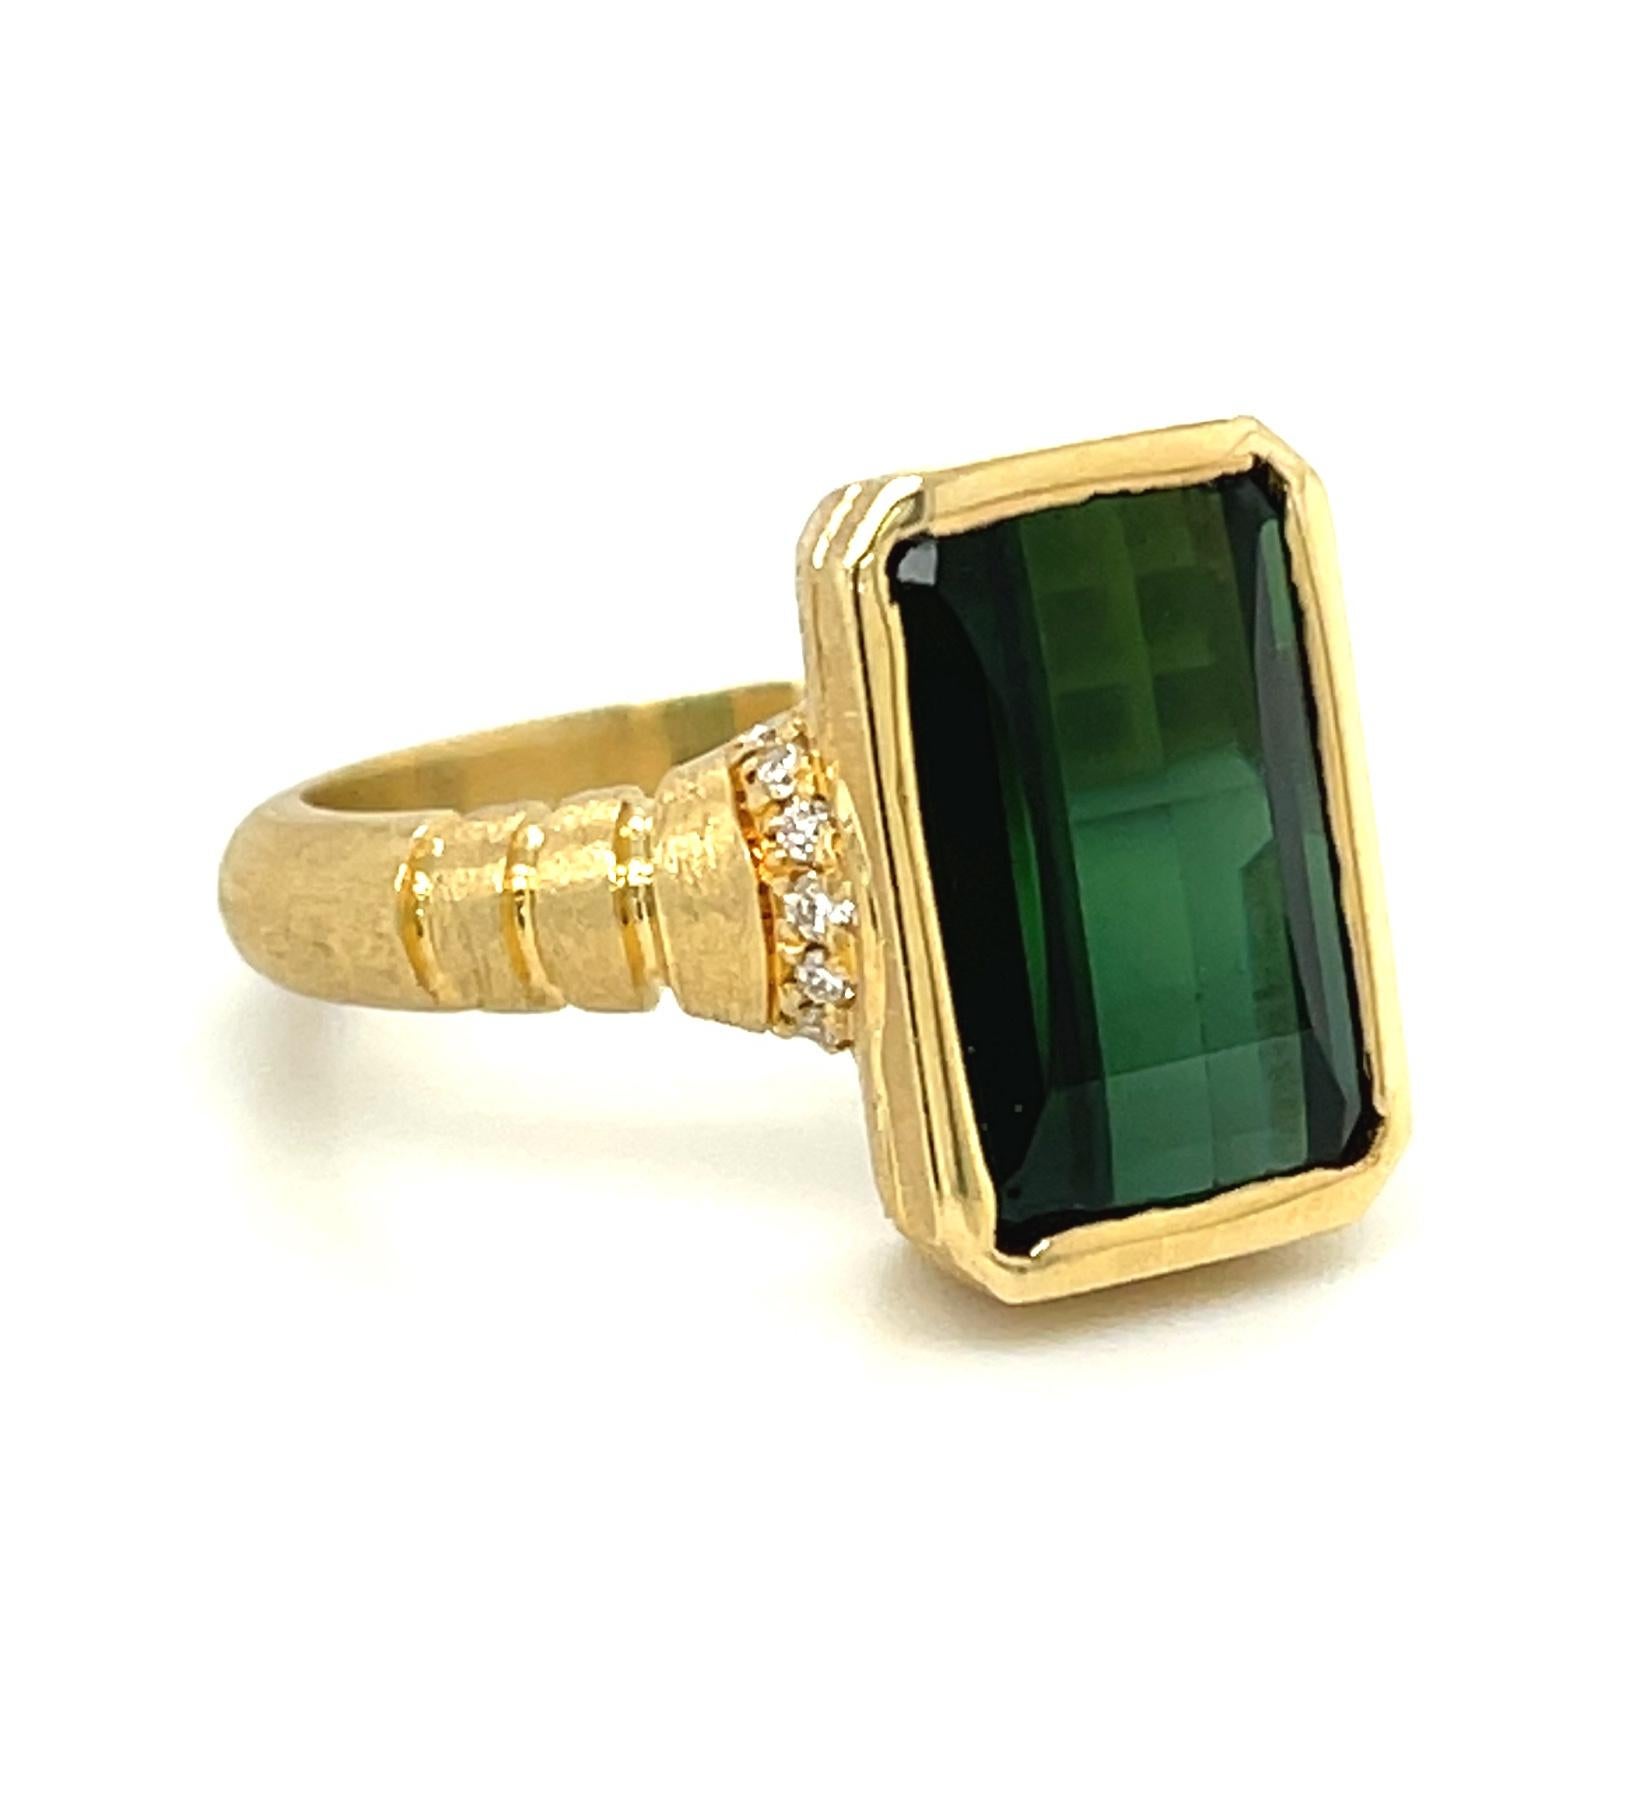 Emerald Cut Illusion Cut Green Tourmaline and Diamond Ring in 18k Yellow Gold For Sale